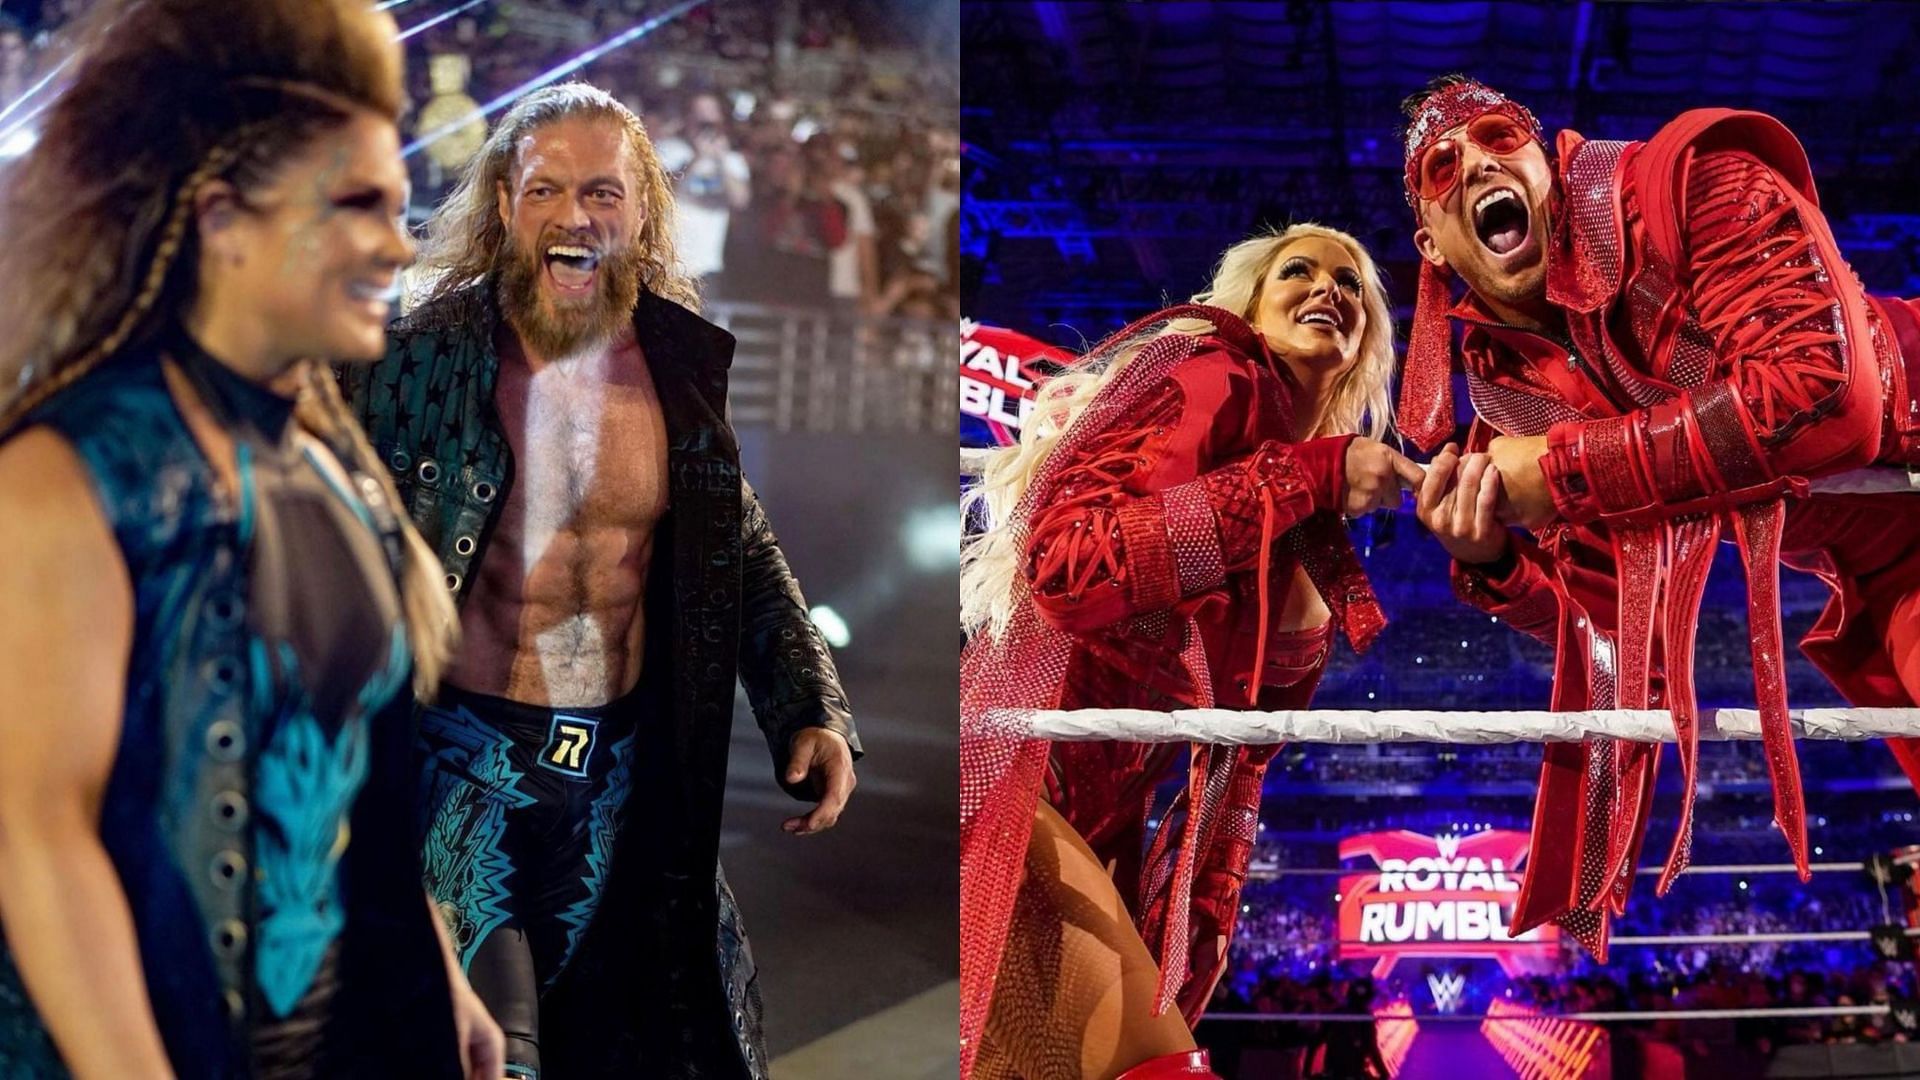 Edge with Beth Phoenix (left) and The Miz with Maryse (right)